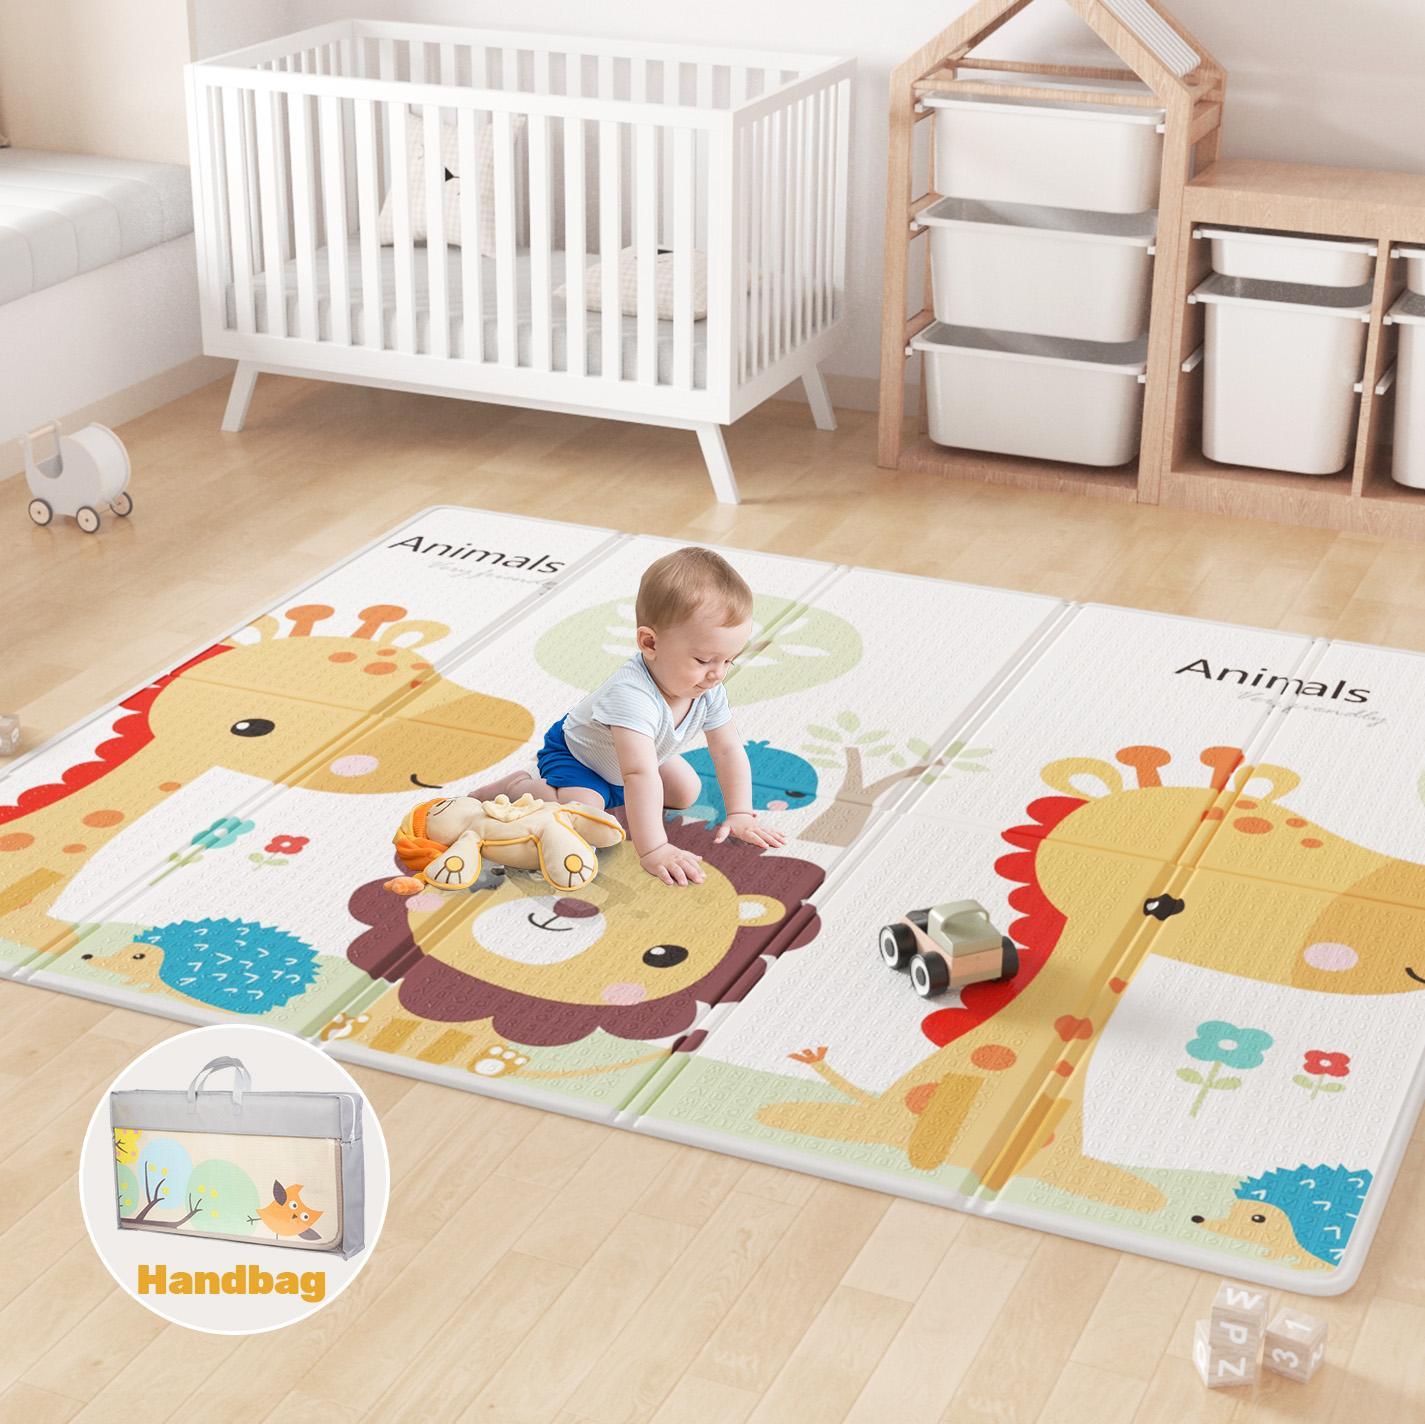 Advwin Foldable Baby Play Mat 150*200*1cm Extra Large Waterproof Activity Playmats Foam Floor Crawling Mat with Travel Bag